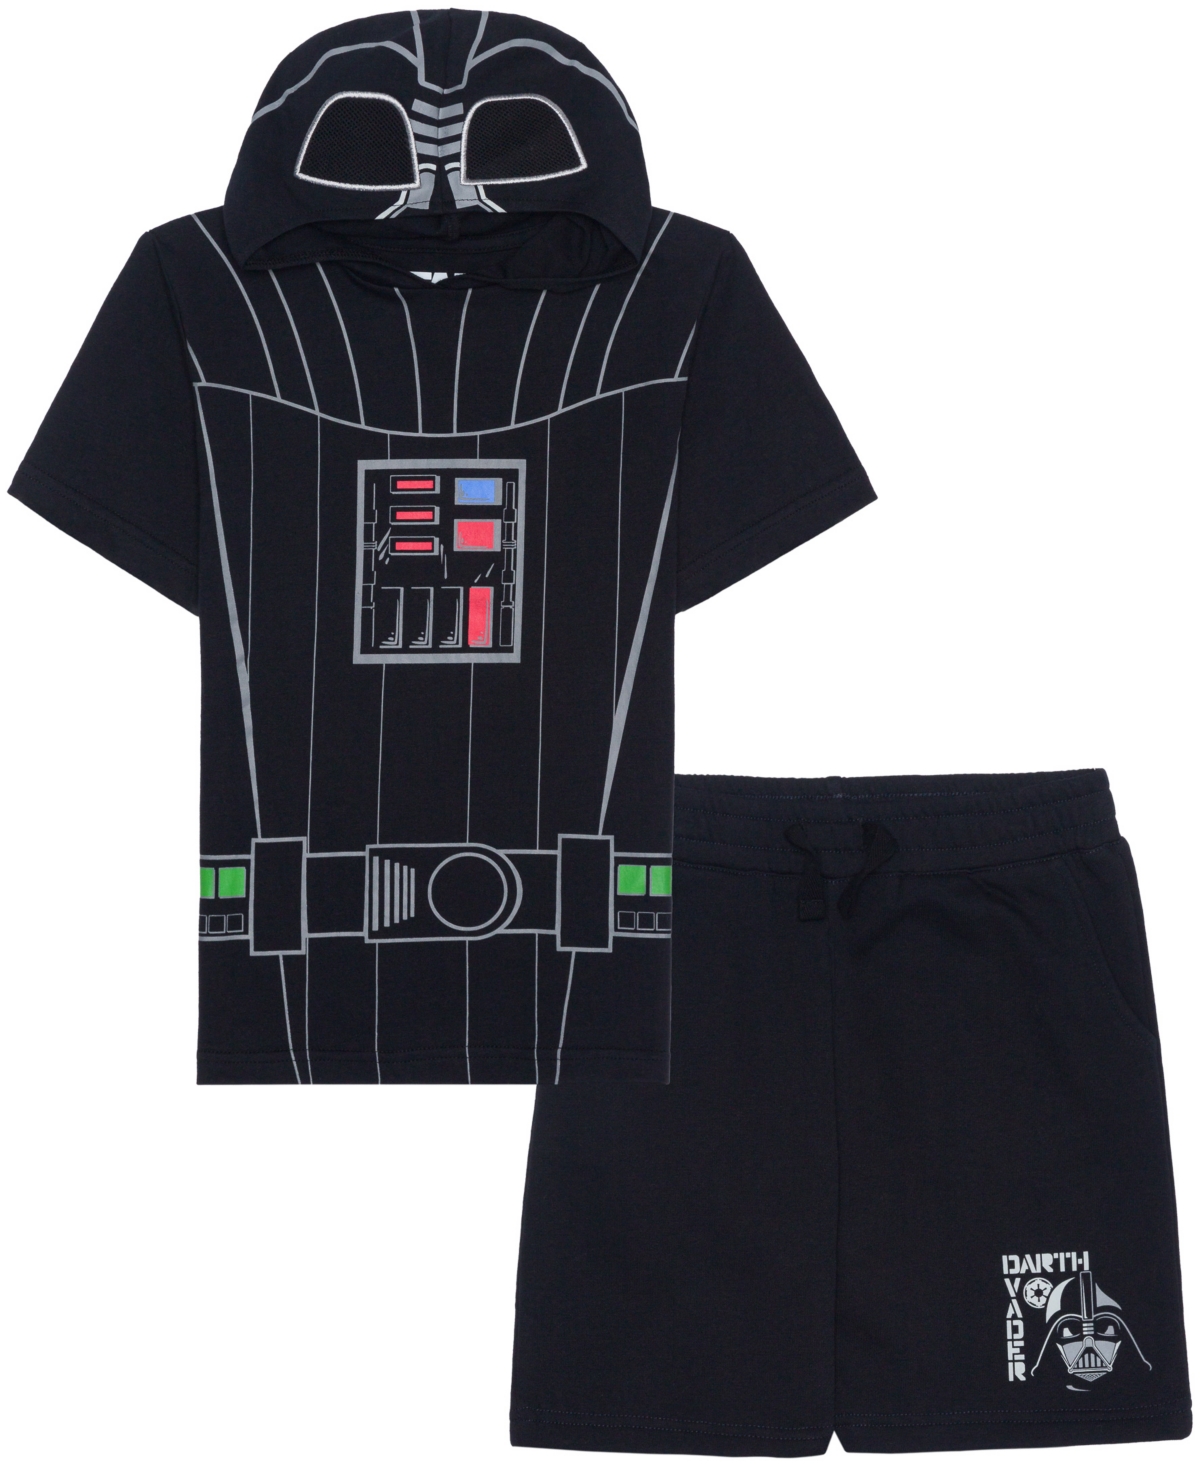 Hybrid Kids' Toddler And Little Boys Darth Vader Cosplay Hooded T-shirt And Shorts, 2 Pc Set In Black